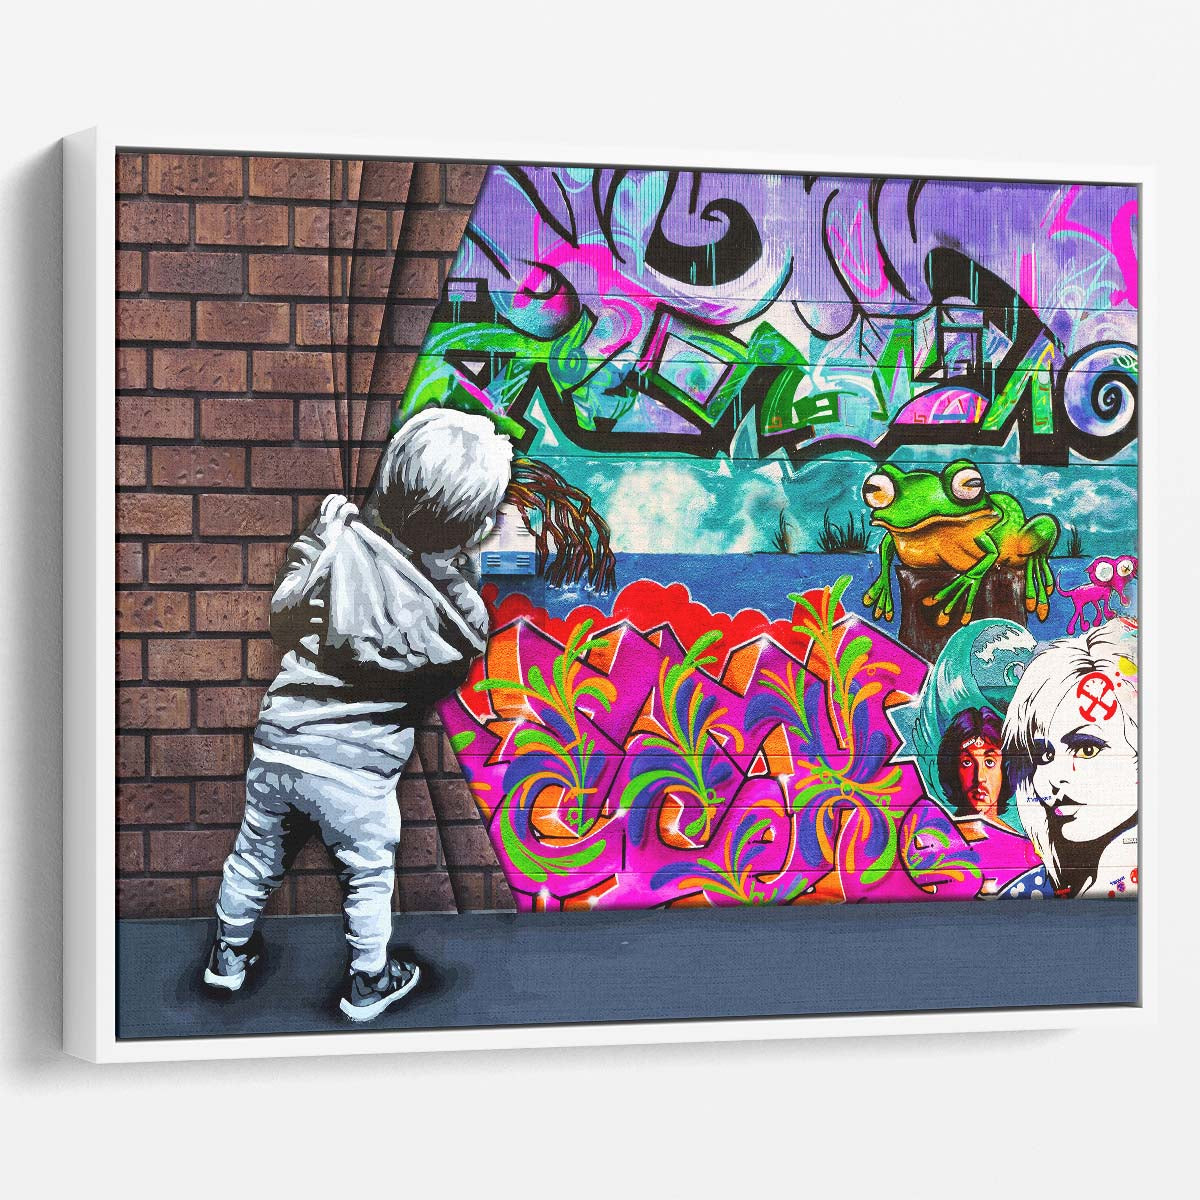 Banksy Behind The Curtain Graffiti Wall Art by Luxuriance Designs. Made in USA.